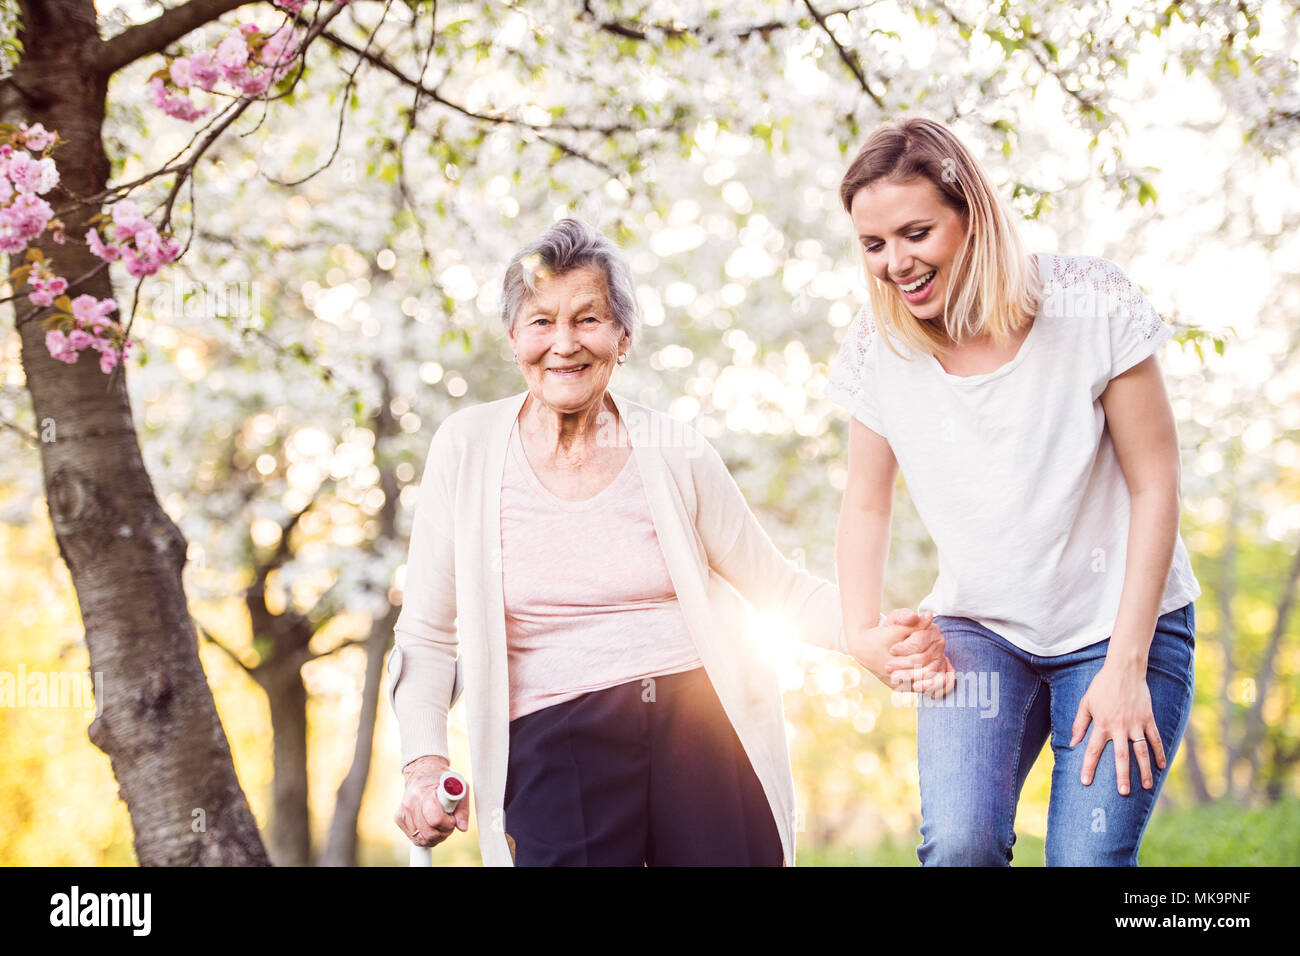 Elderly grandmother with crutch and granddaughter in spring nature. Stock Photo